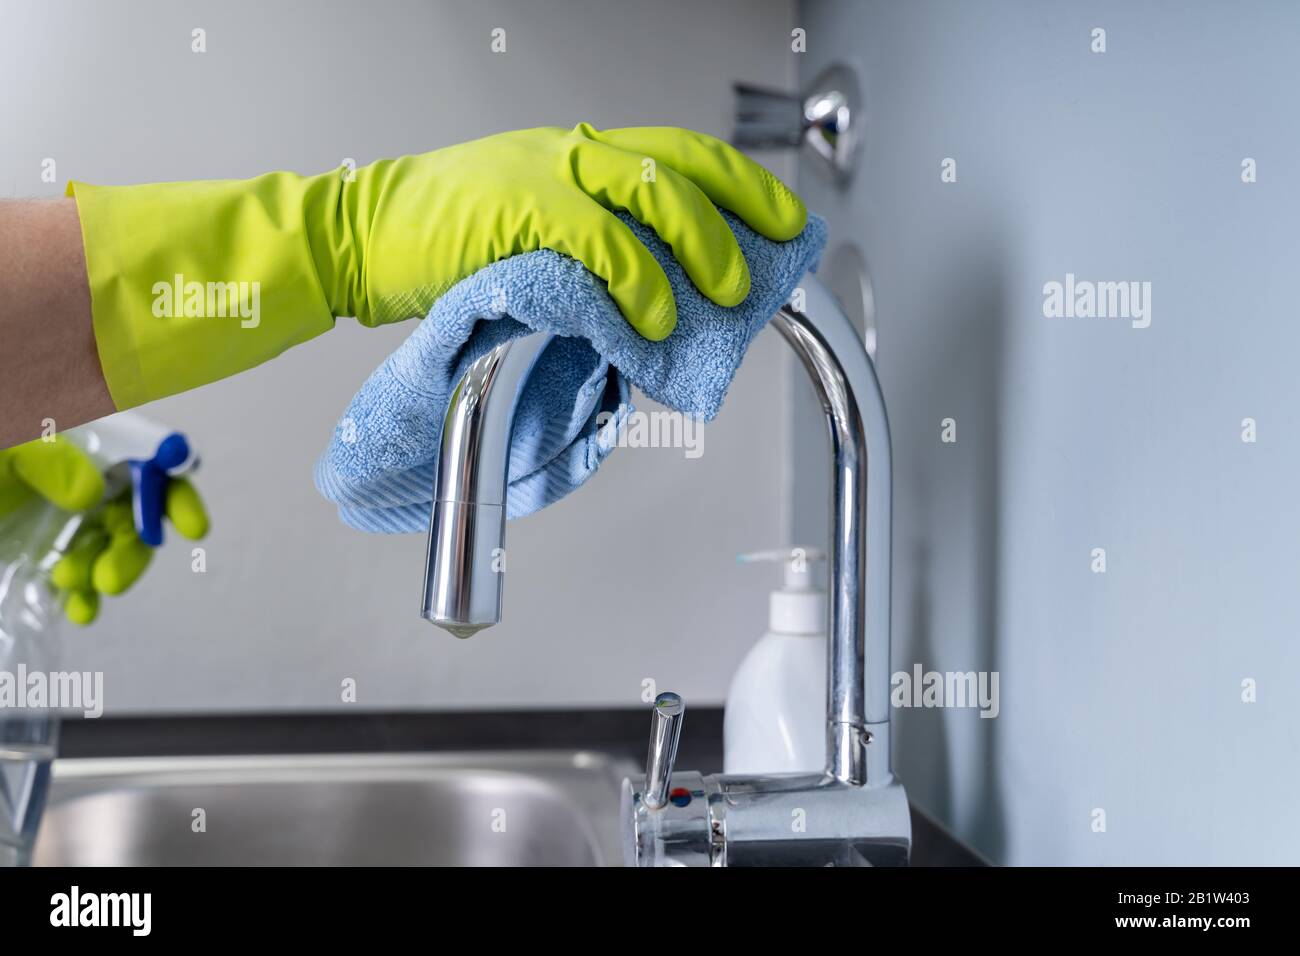 Young Man Cleaning The Steel Tap In The Kitchen Stock Photo